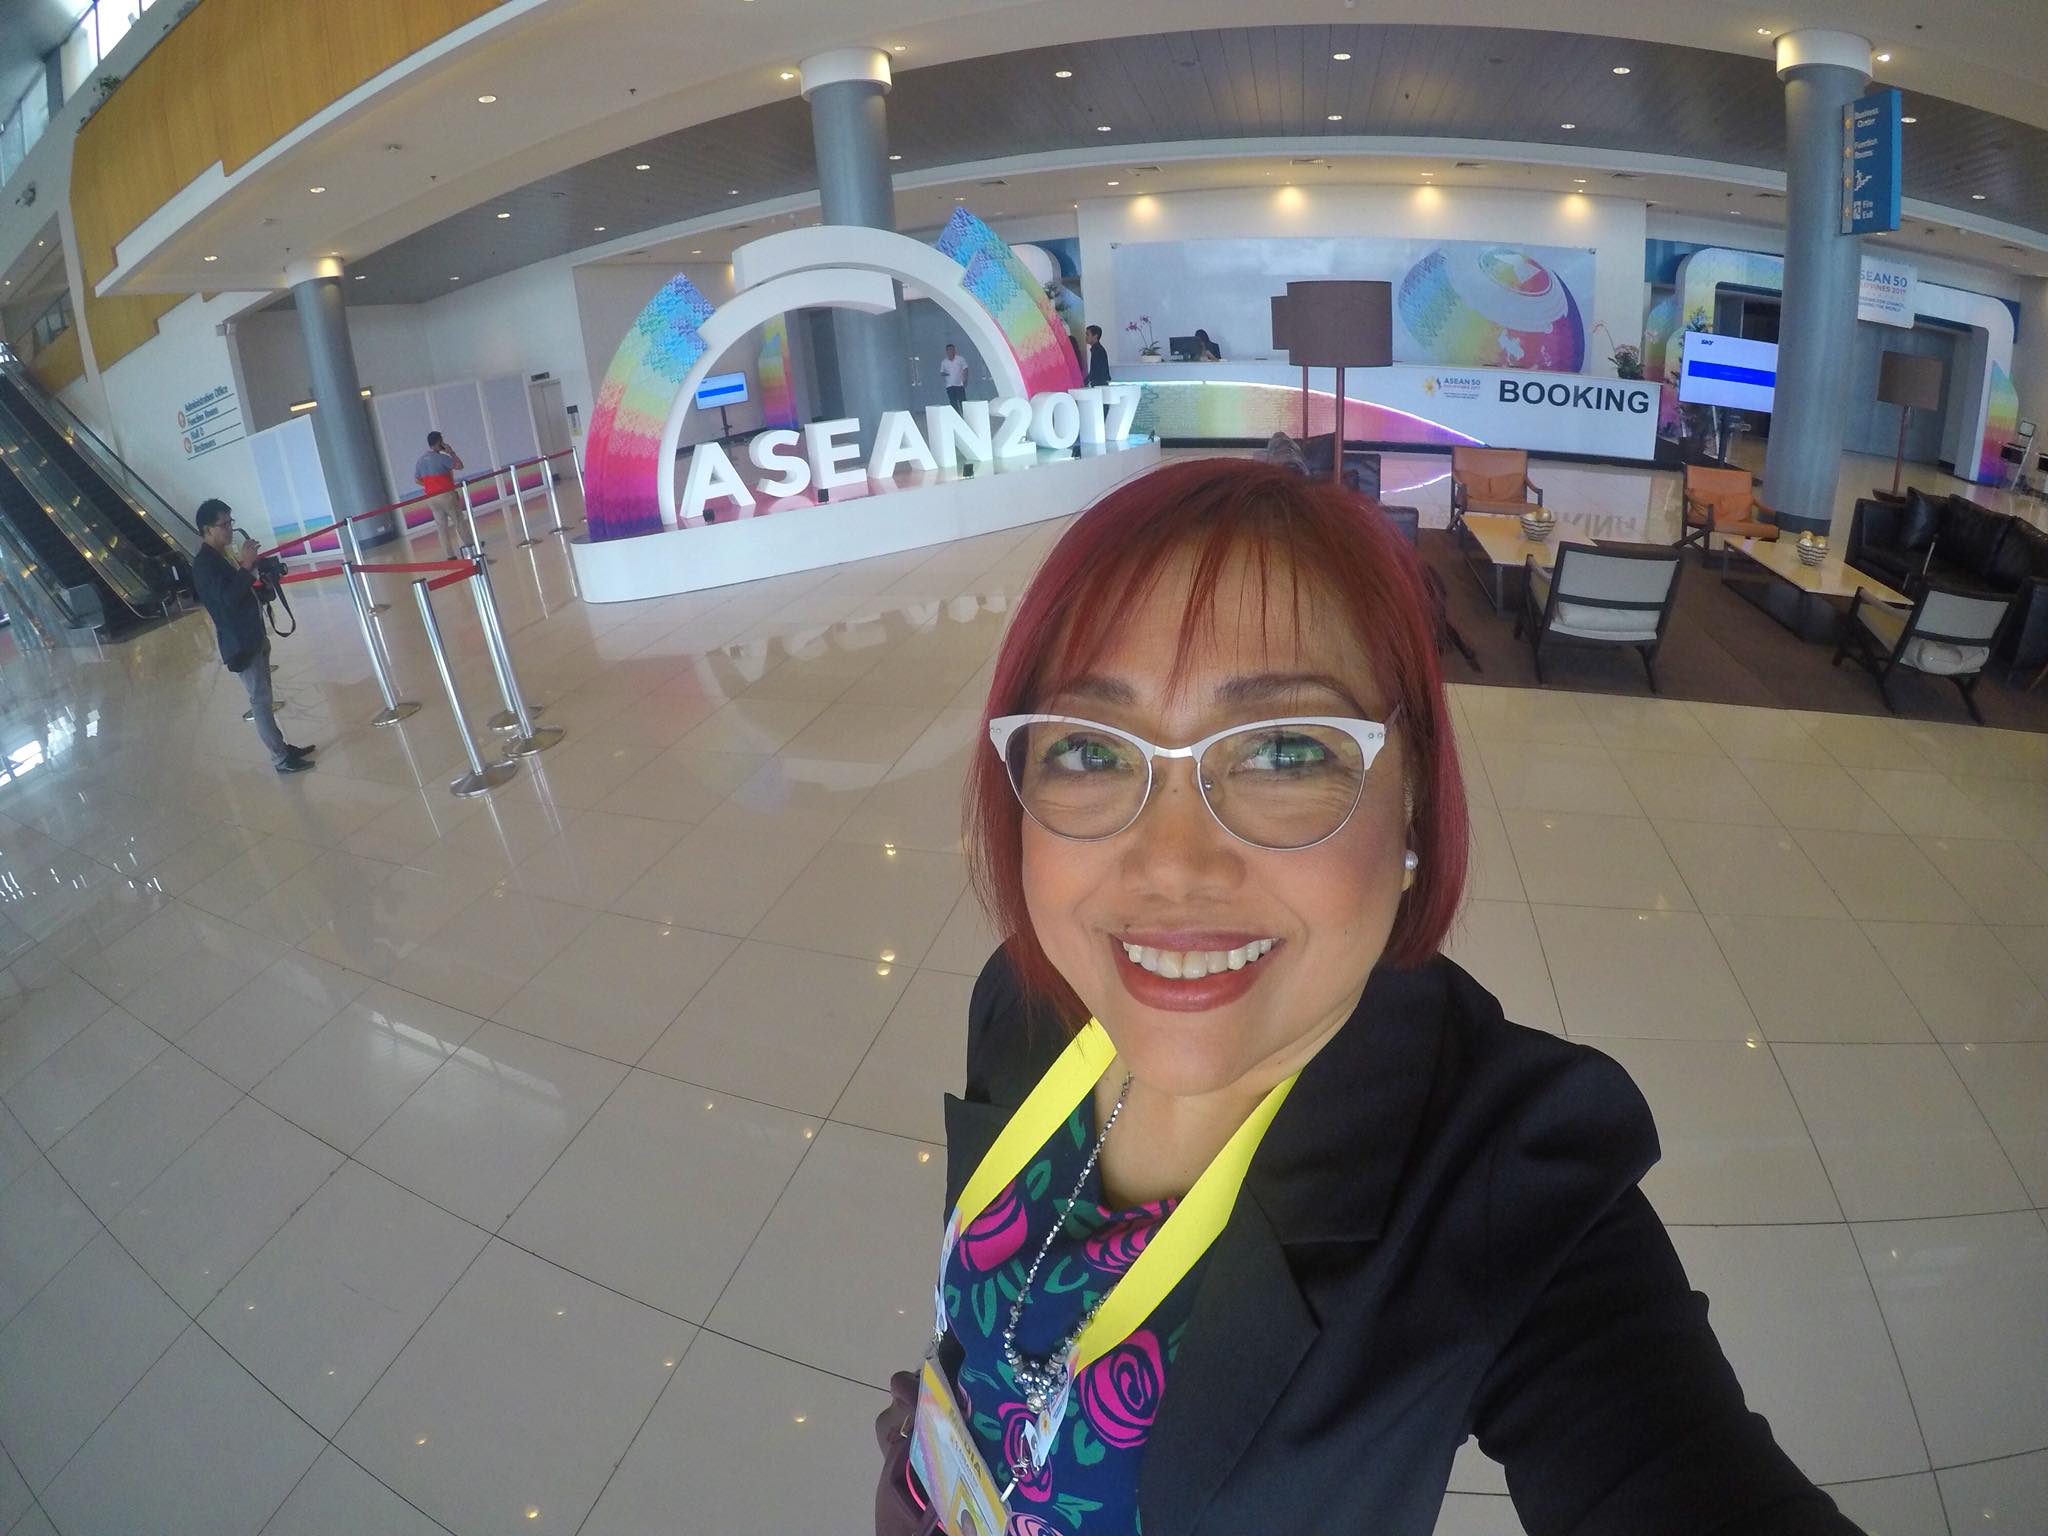 covering asean summit